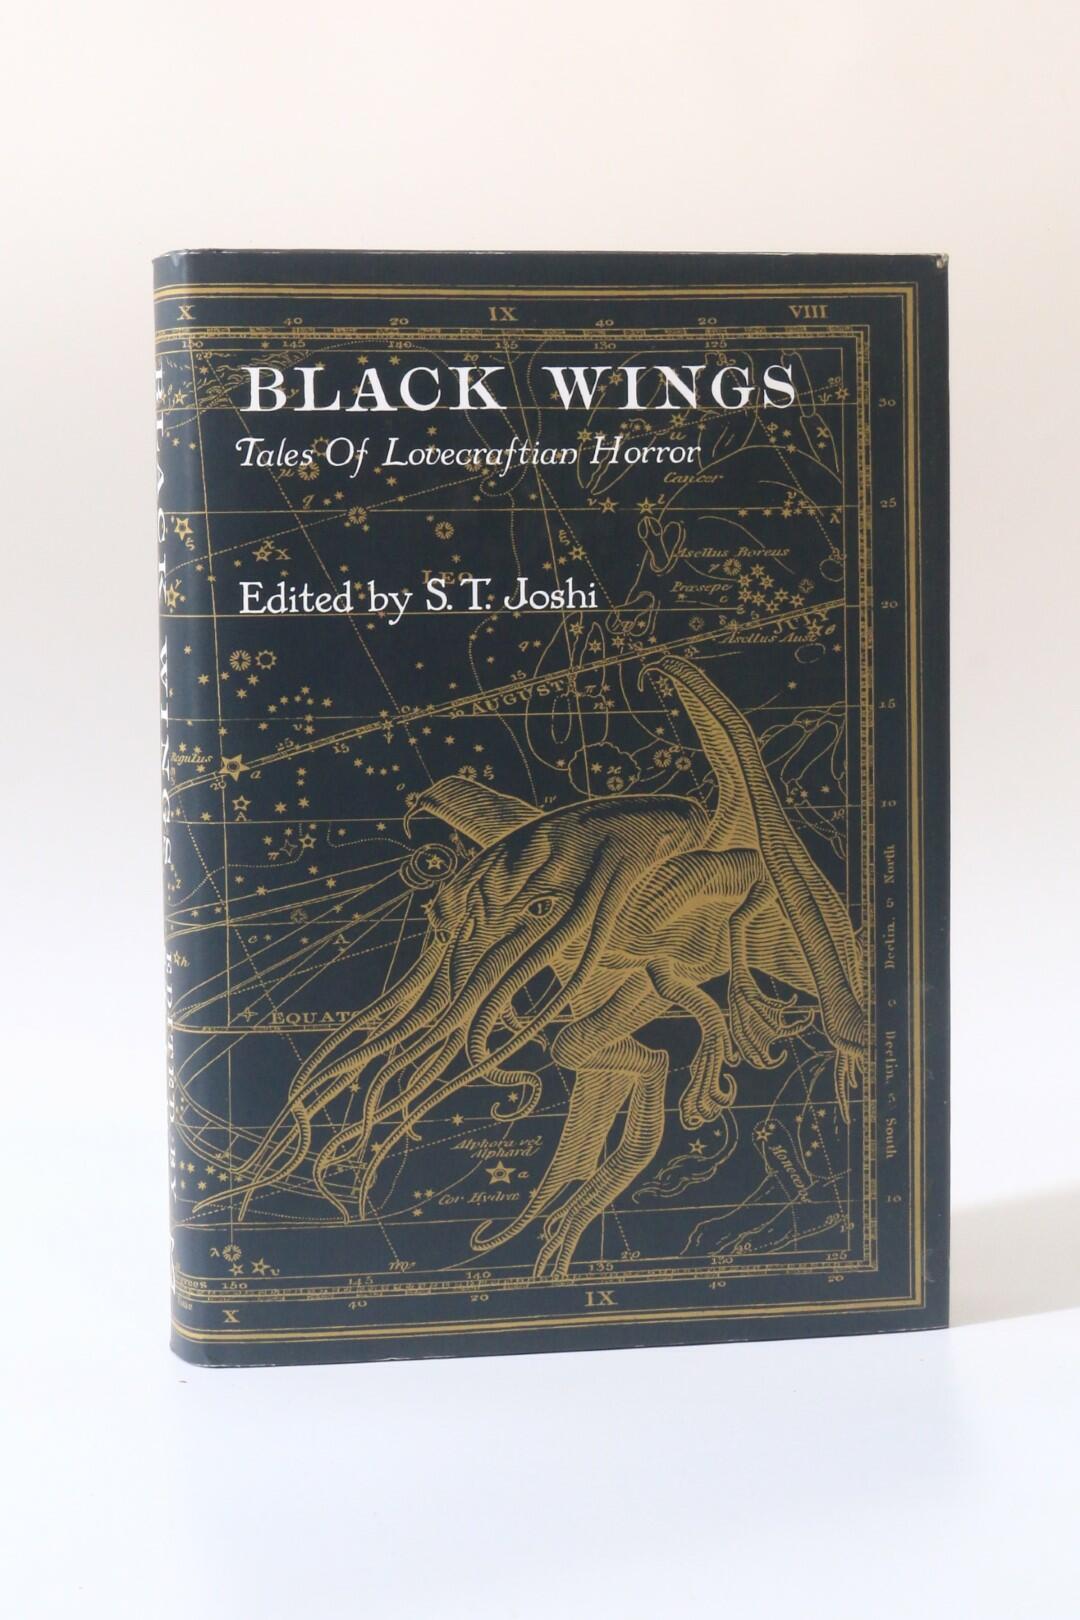 S.T. Joshi [Lovecraft Interest] - Black Wings: Tales of Lovecraftian Horror - PS Publishing, 2010, First Edition.